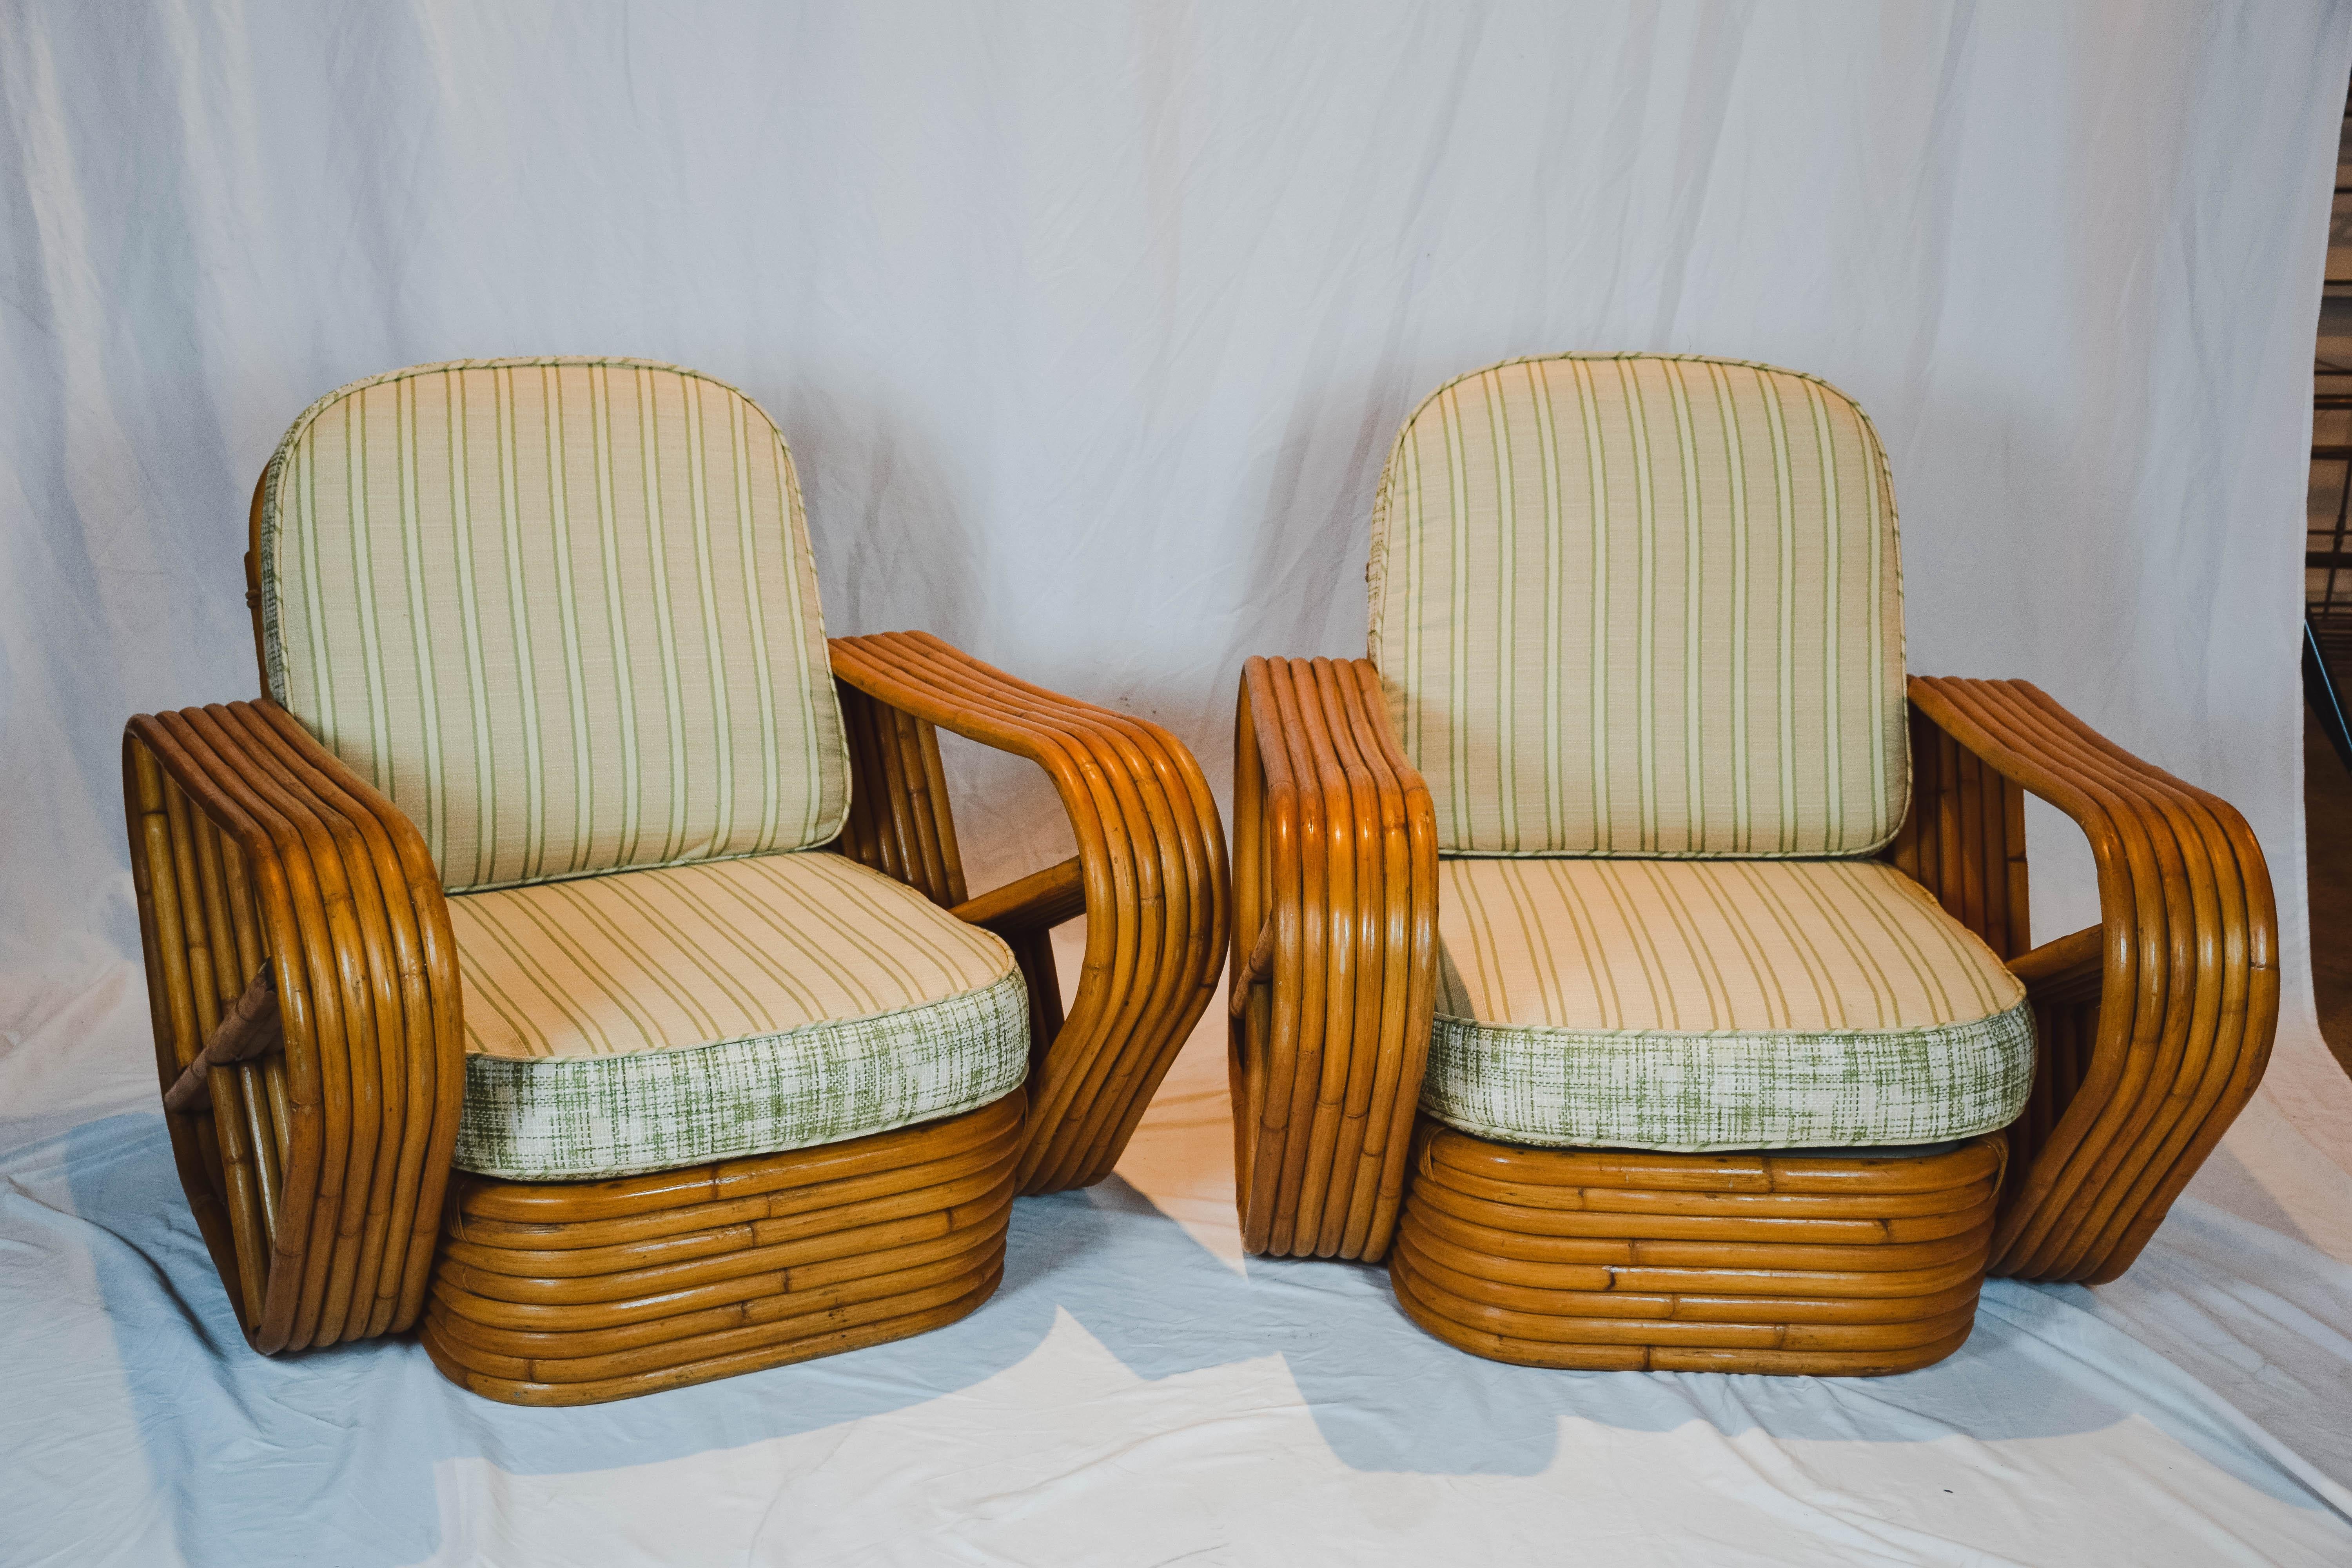 This fabulous pair of Pretzel lounge chairs are attributed to Paul Frankl. Each chair has six strand arms and feature a steam bent rattan frame. The cushions are custom upholstered to be reversible.